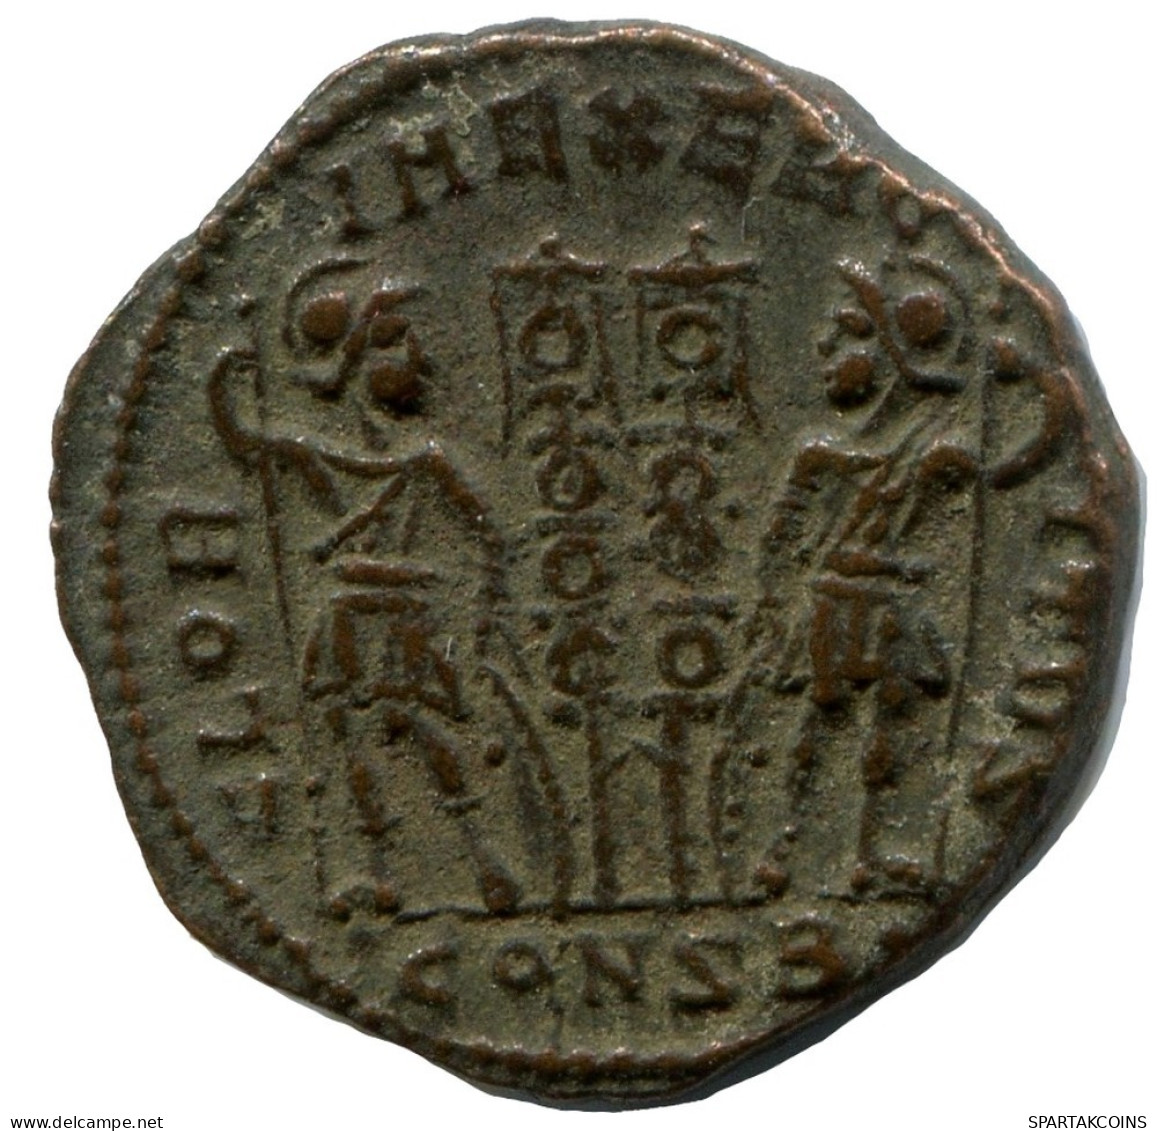 CONSTANTINE I MINTED IN CONSTANTINOPLE FOUND IN IHNASYAH HOARD #ANC10738.14.F.A - El Imperio Christiano (307 / 363)